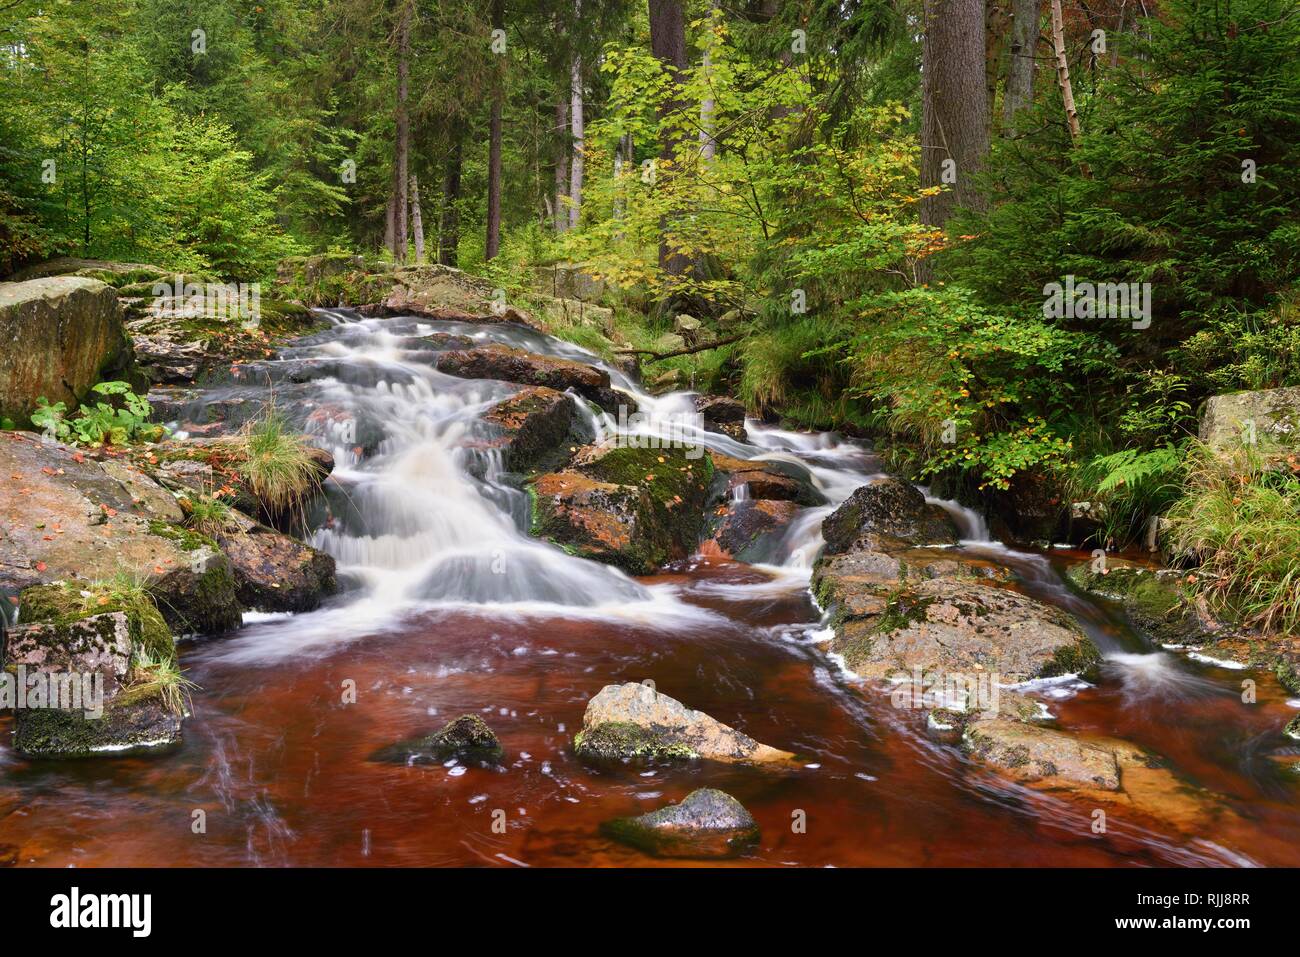 Lower Bodefall, Waterfall of the Bode in the Harz Mountains, near Braunlage, Lower Saxony, Germany Stock Photo